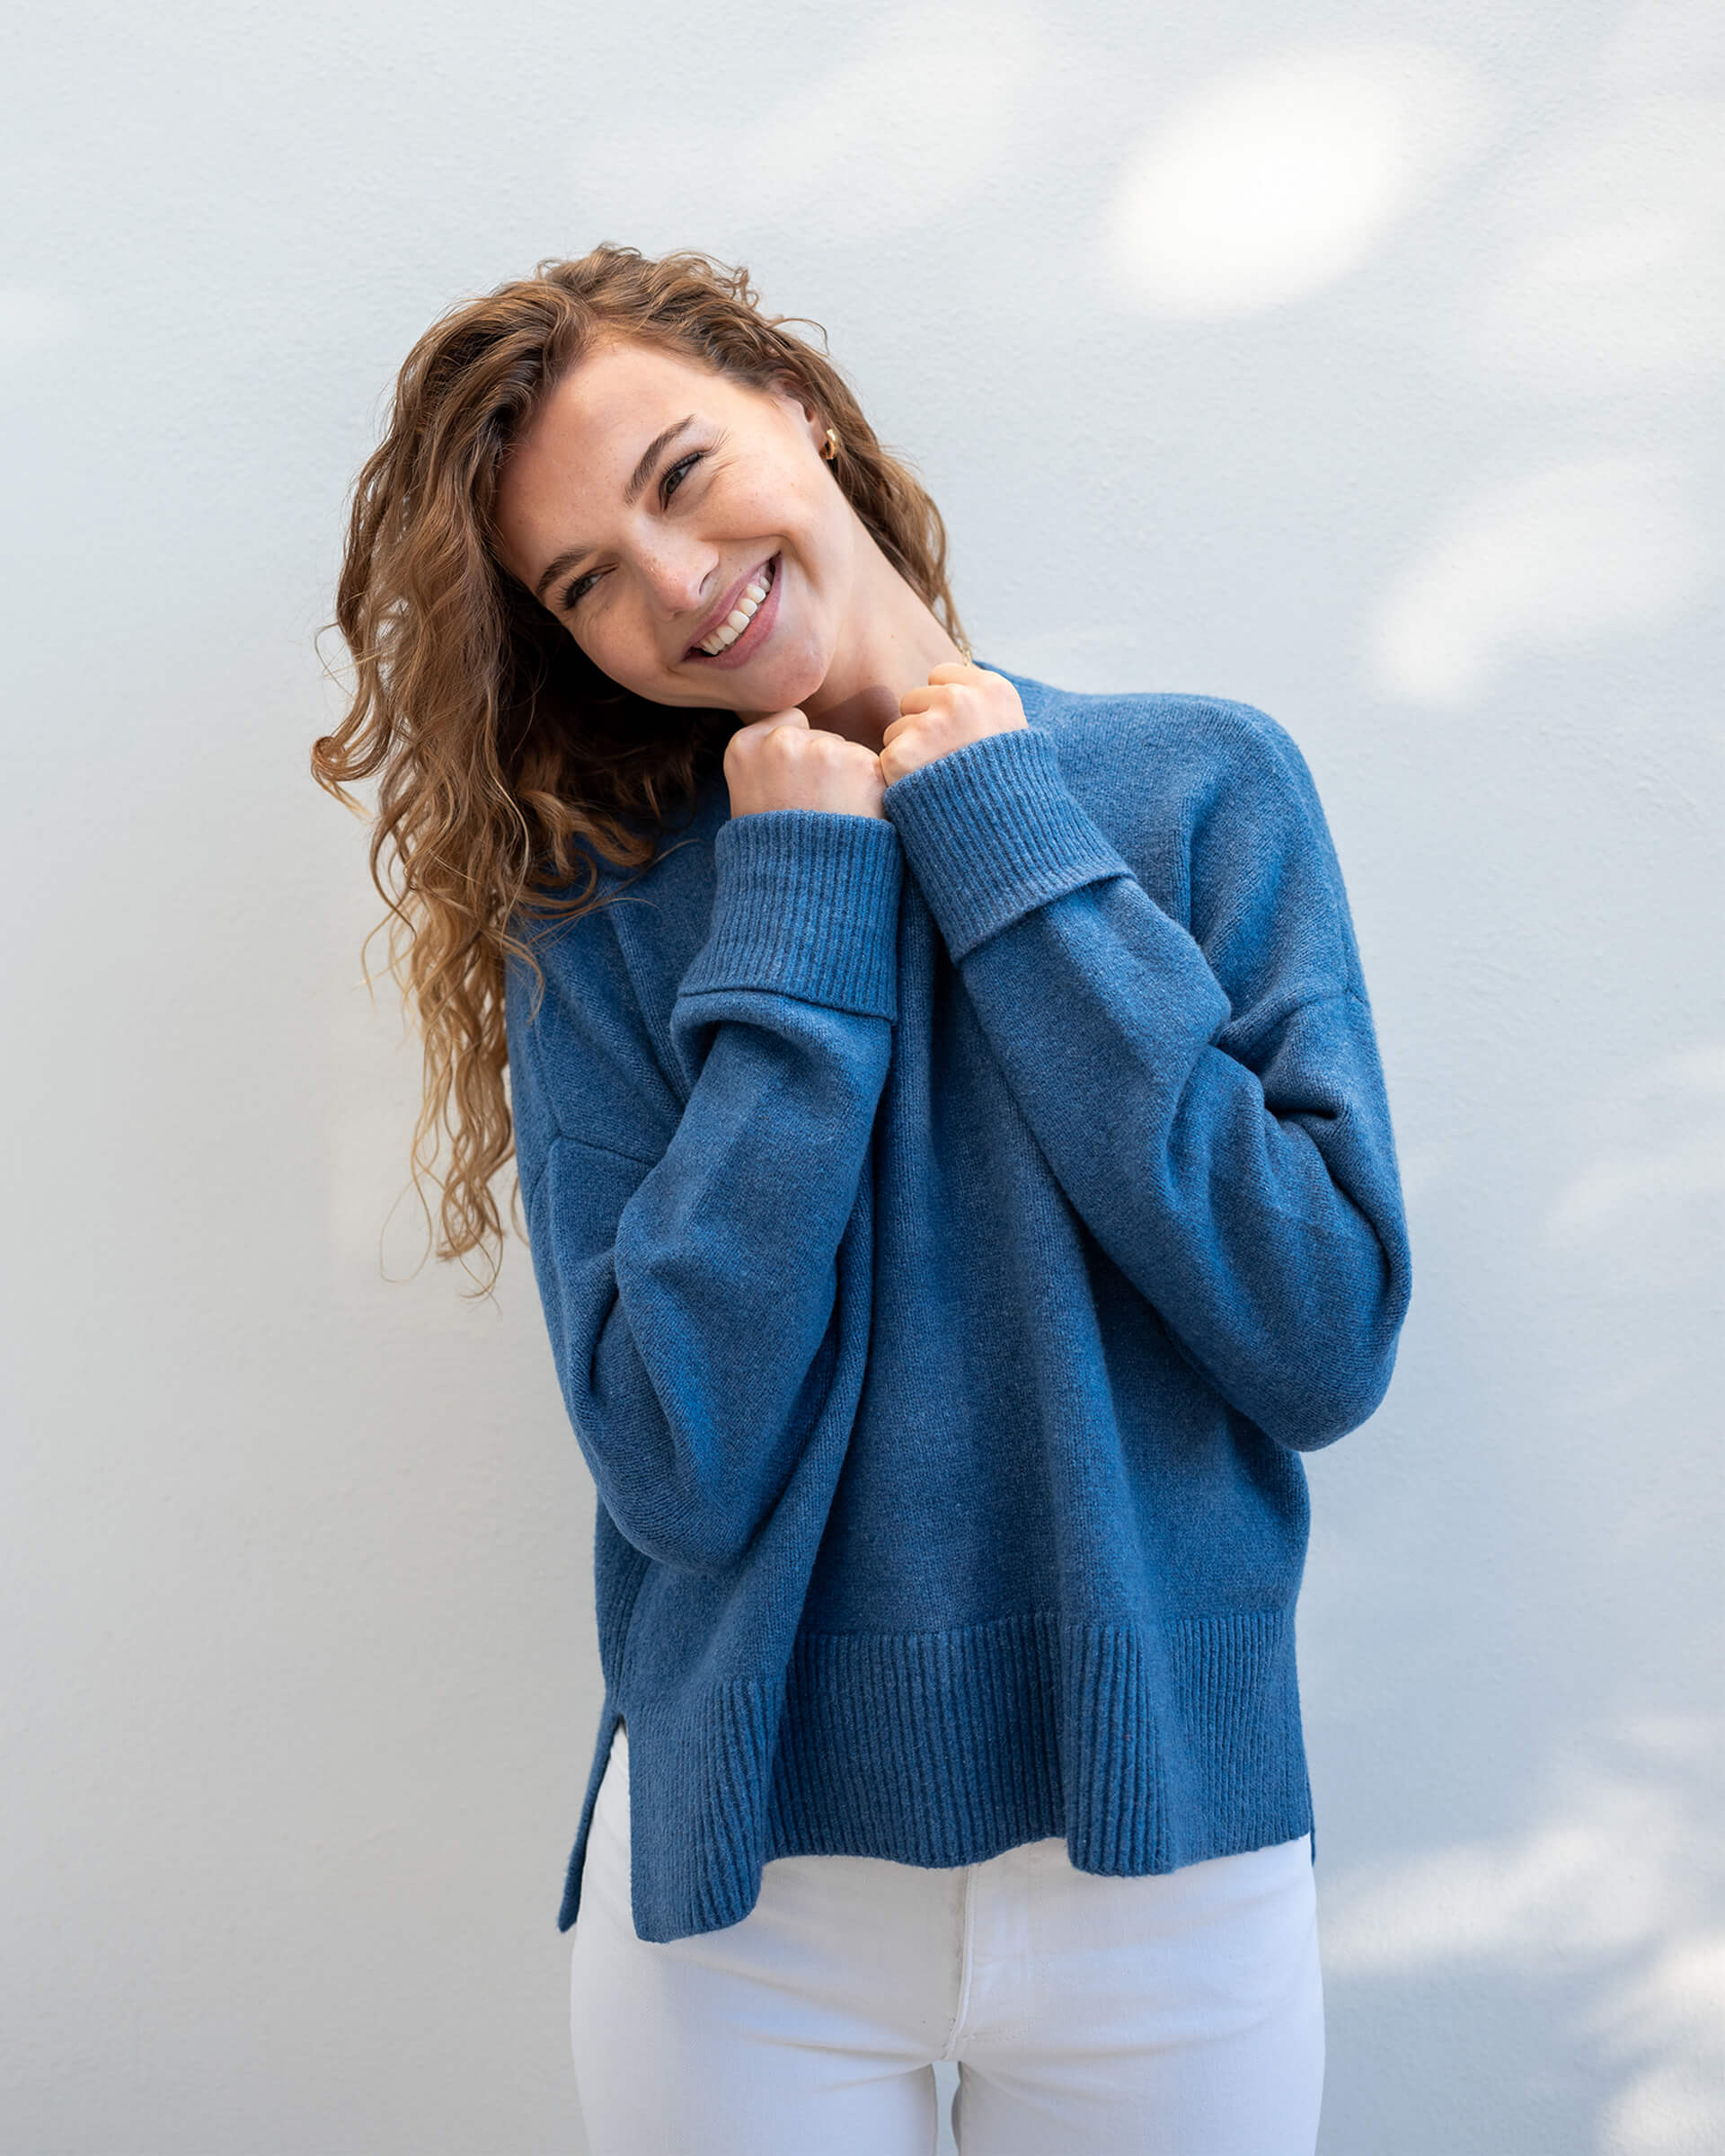 female wearing denim blue crewneck sweater standing in front of a white wall 